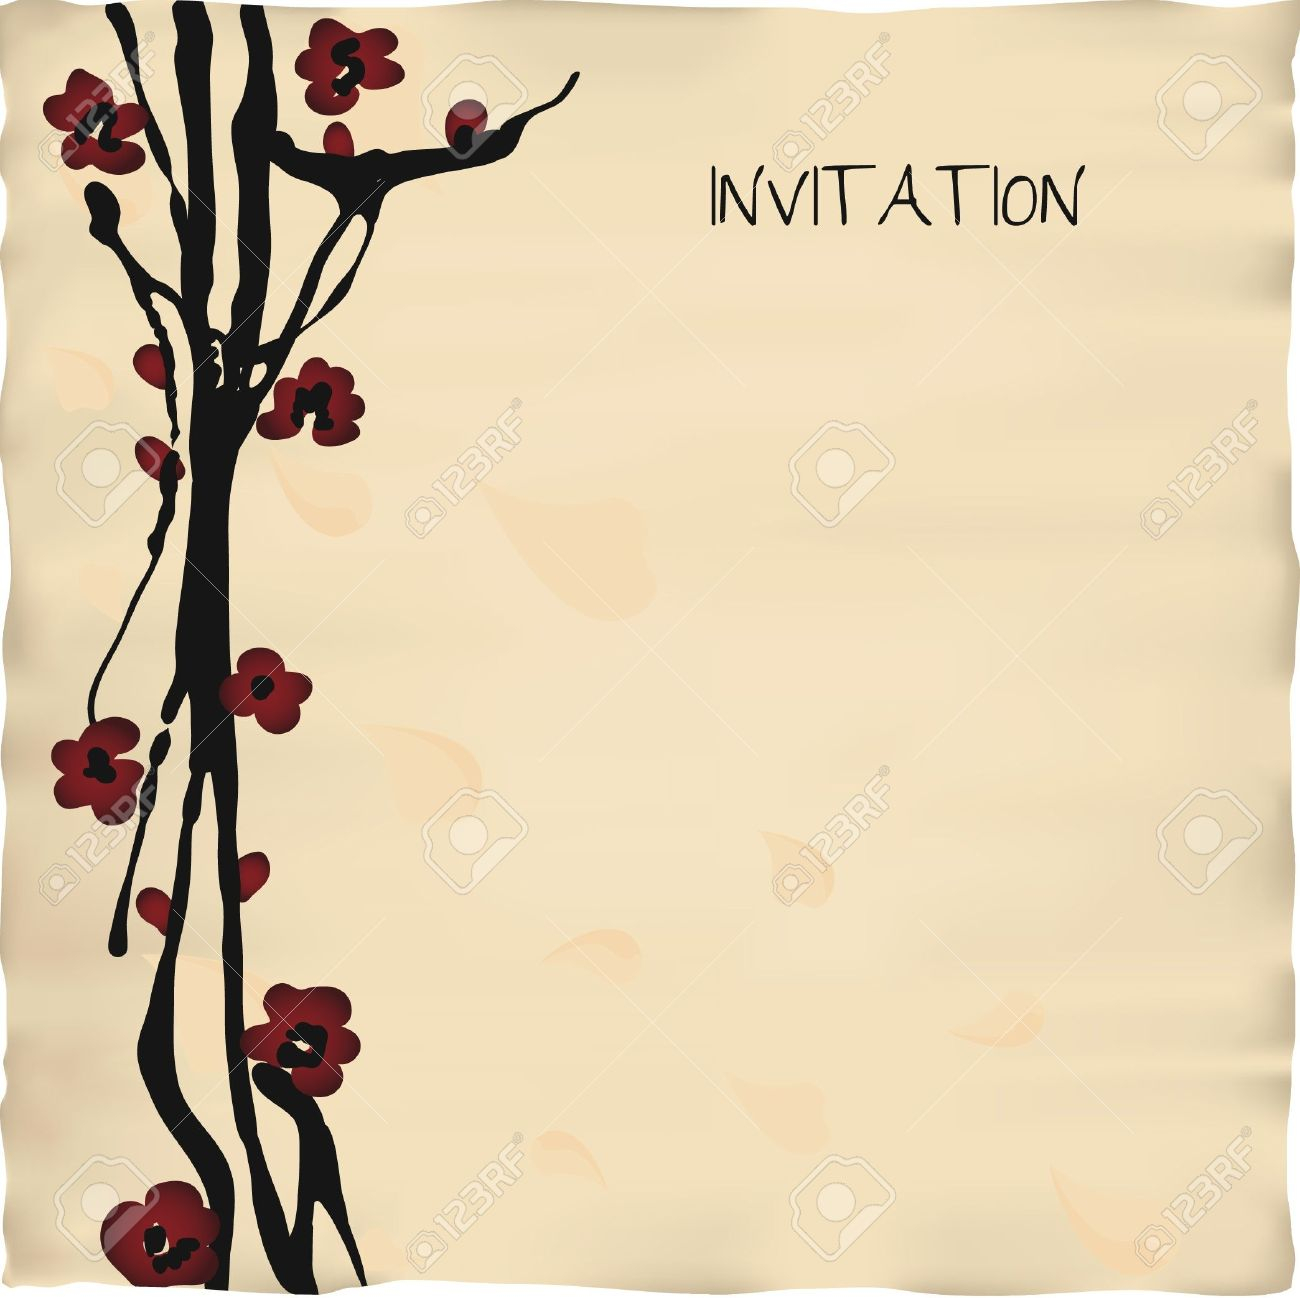 Japanese Or Chinese Style Invitation Card Template Royalty Free within dimensions 1300 X 1298